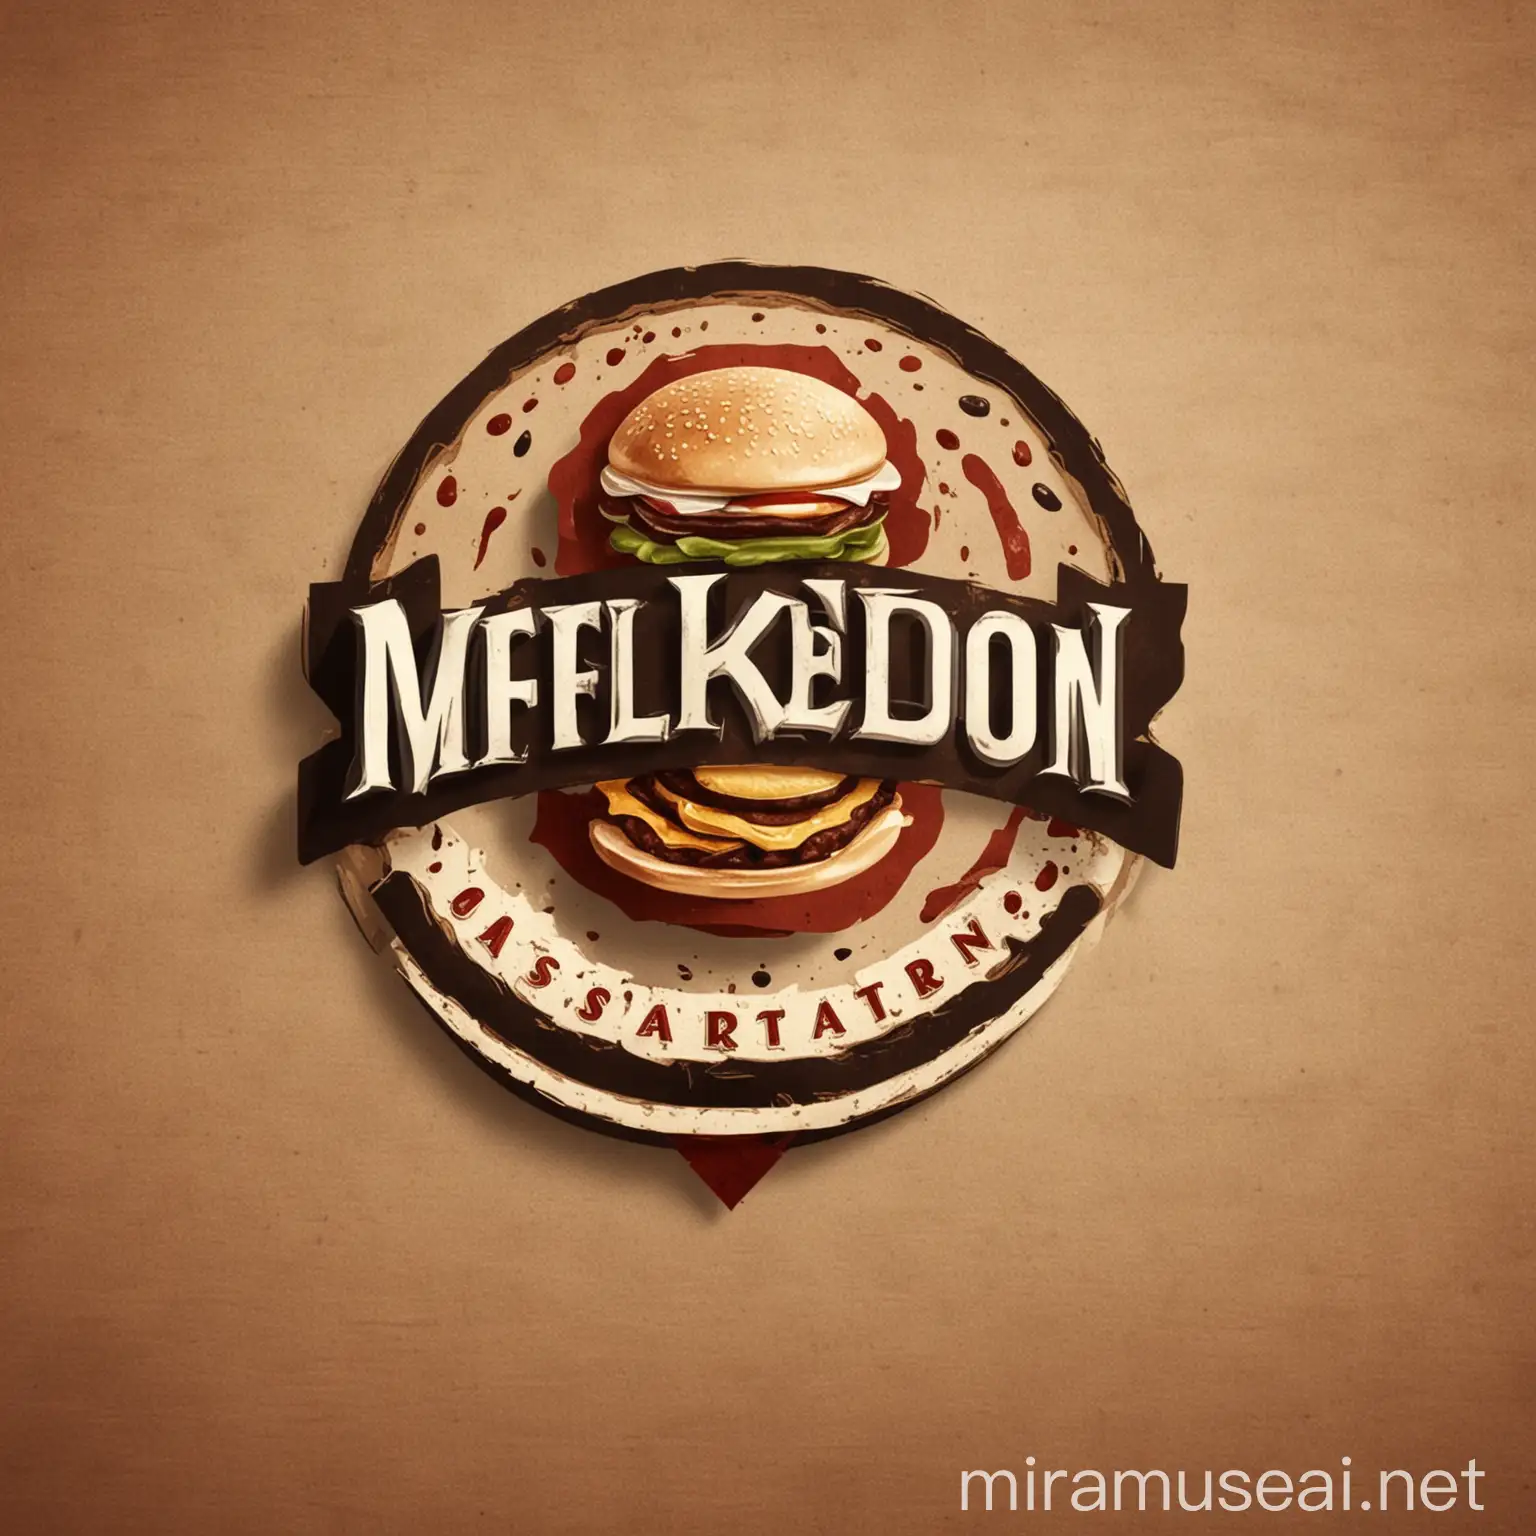 Create a unique logo for Mal-keldon fast food restaurant that attracts and seems luxurious